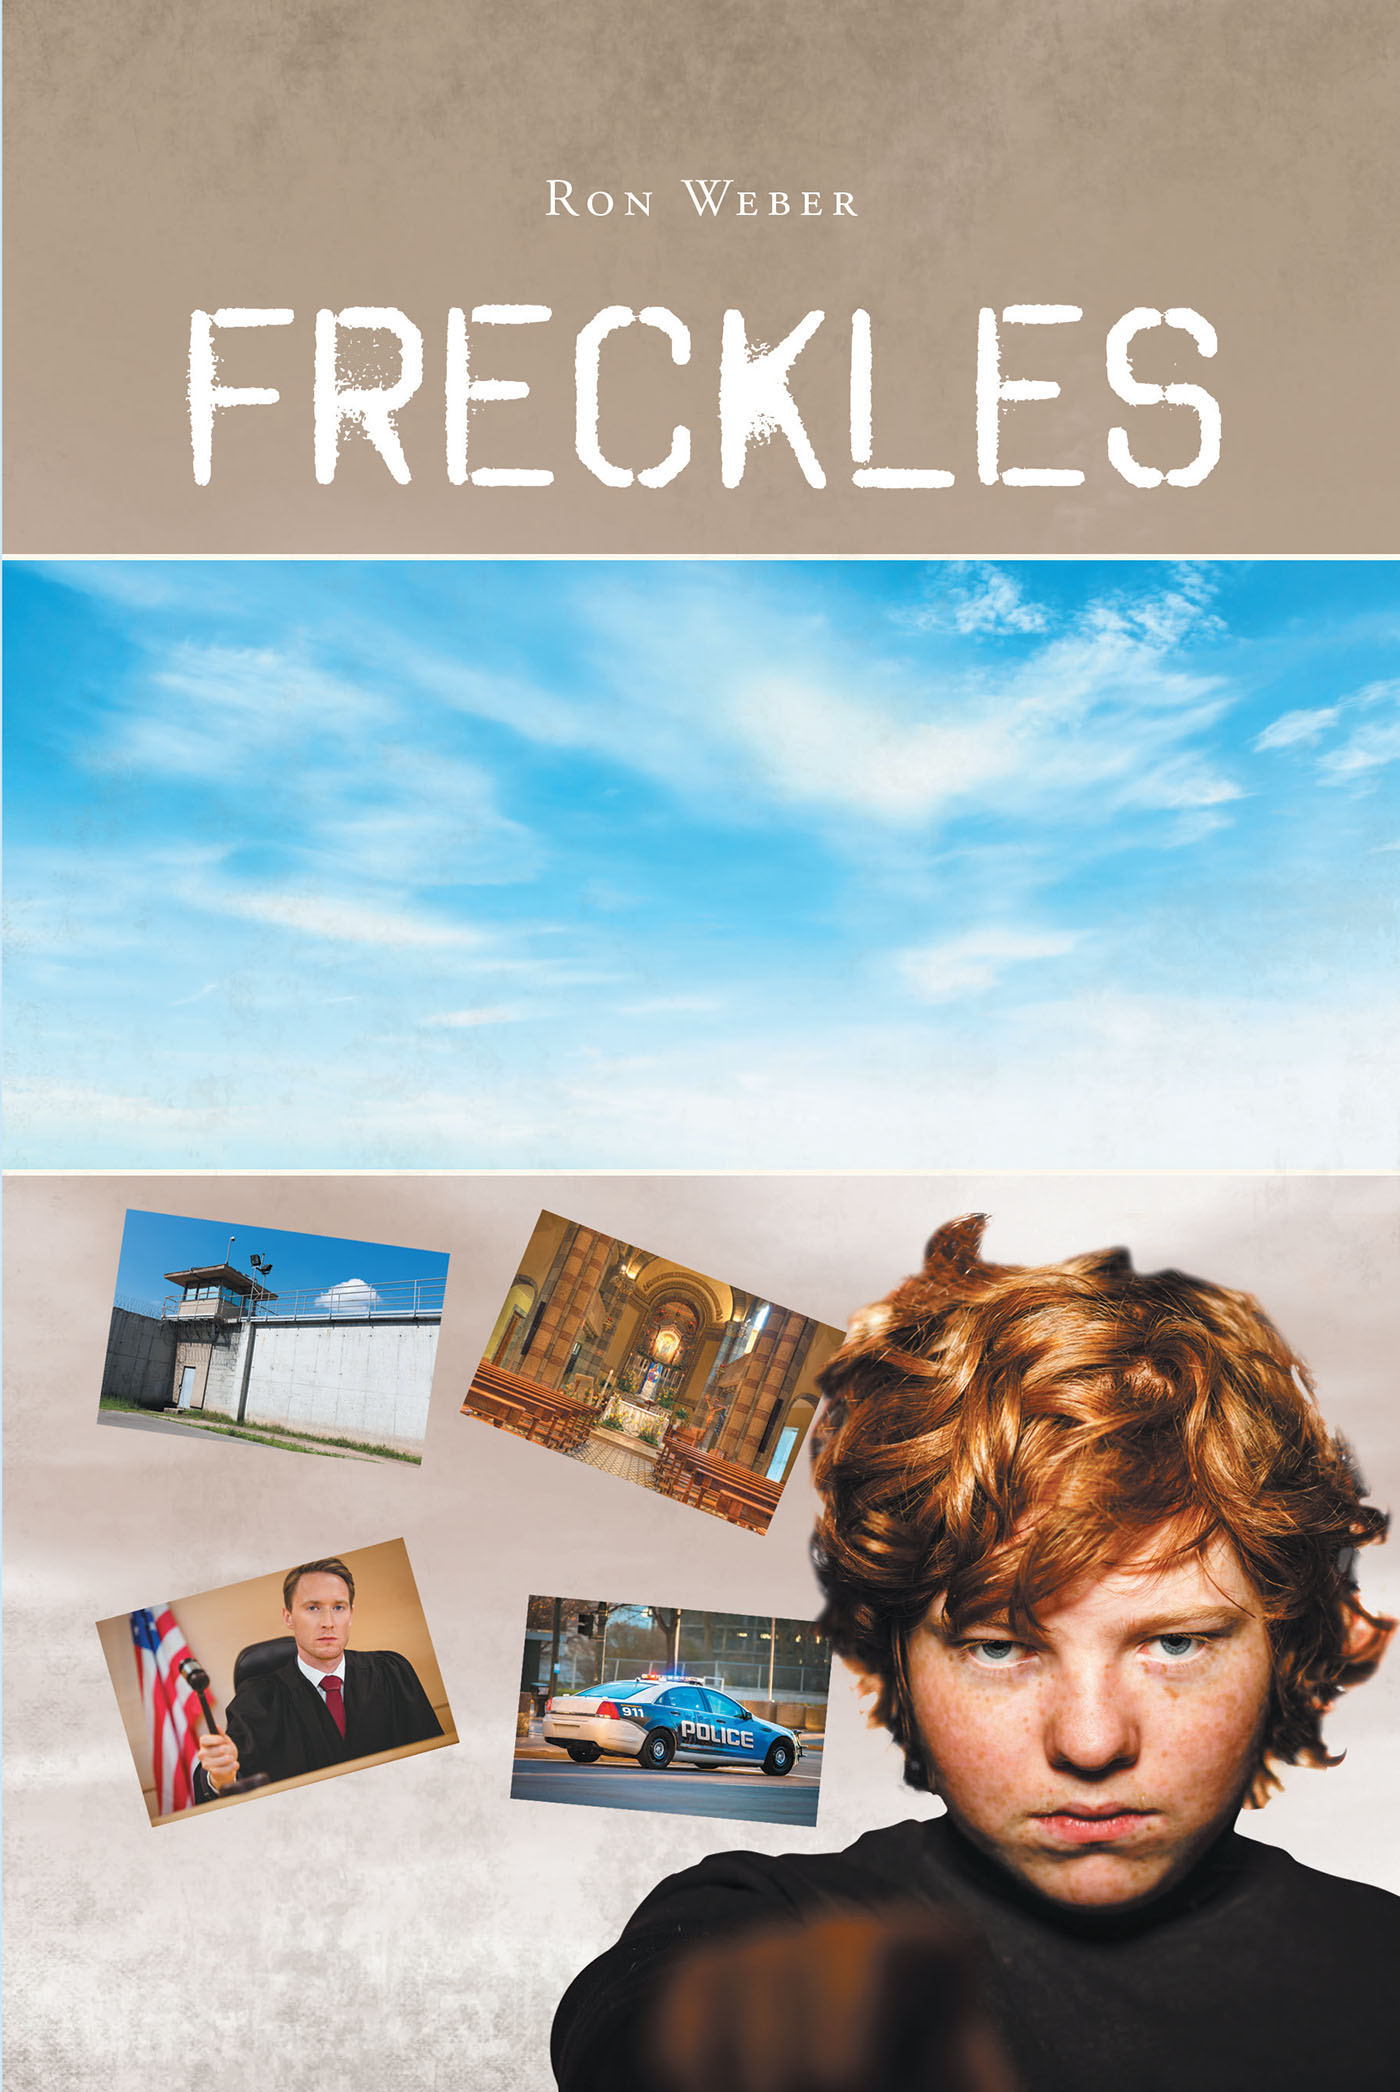 Freckles Cover Image